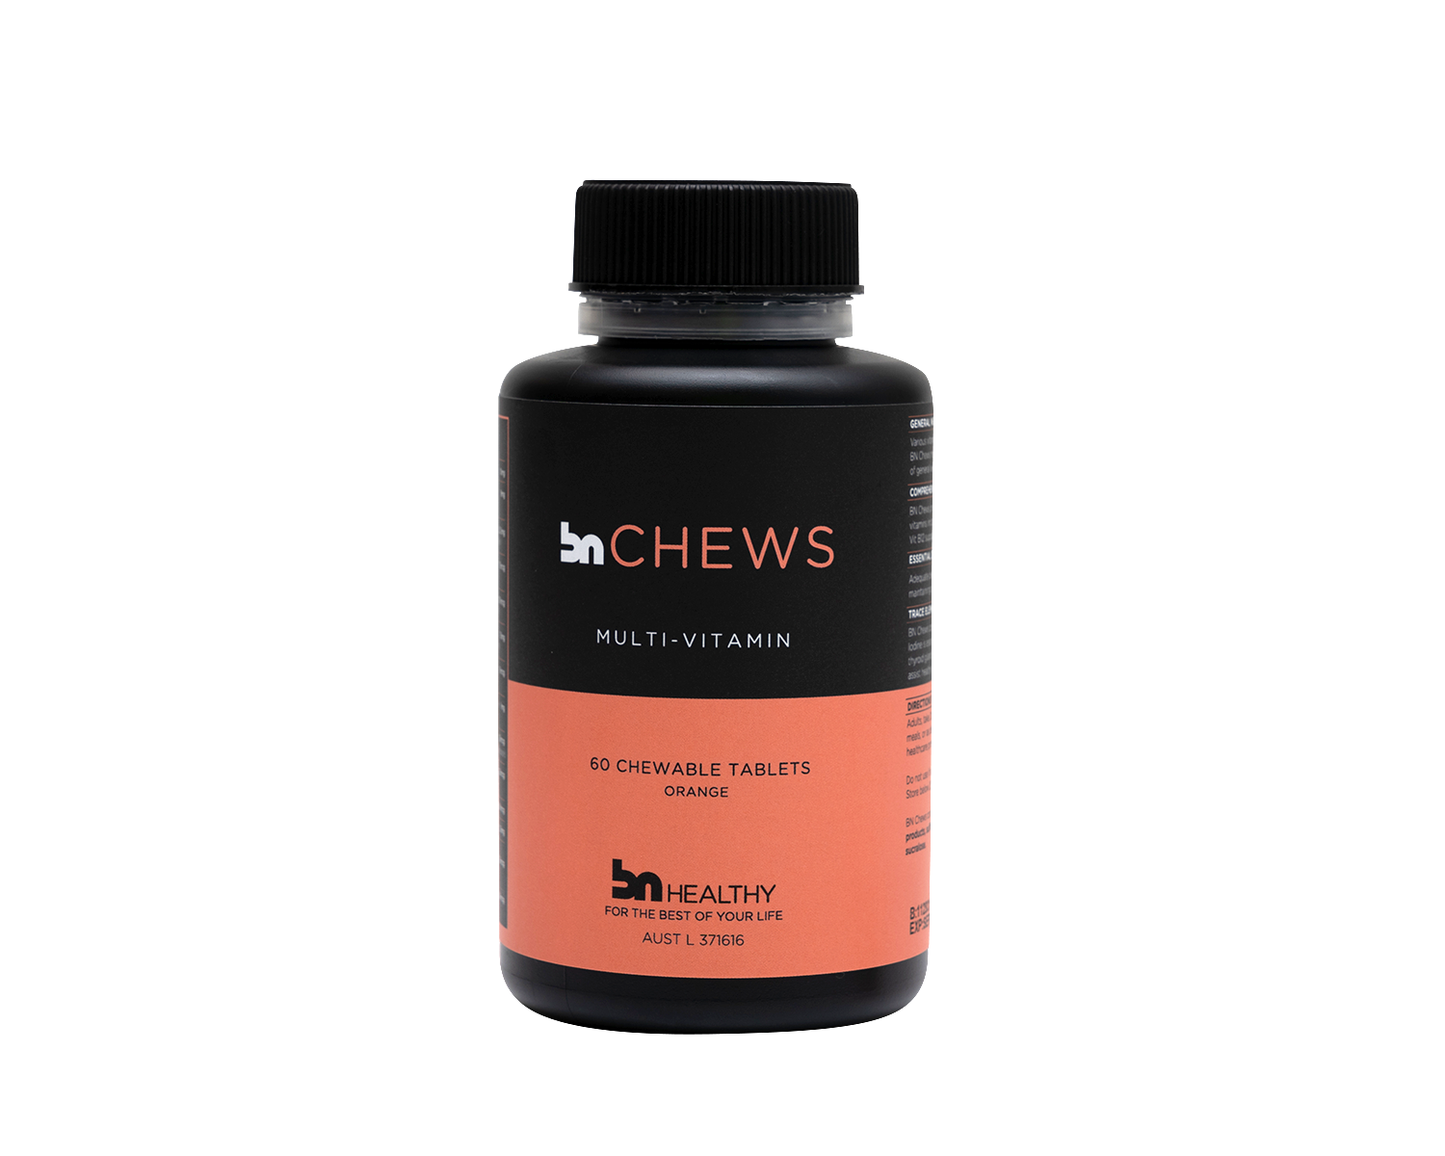 BN Chews -Chewable Bariatric Multivitamins - 3 Month Subscription - Save 30%